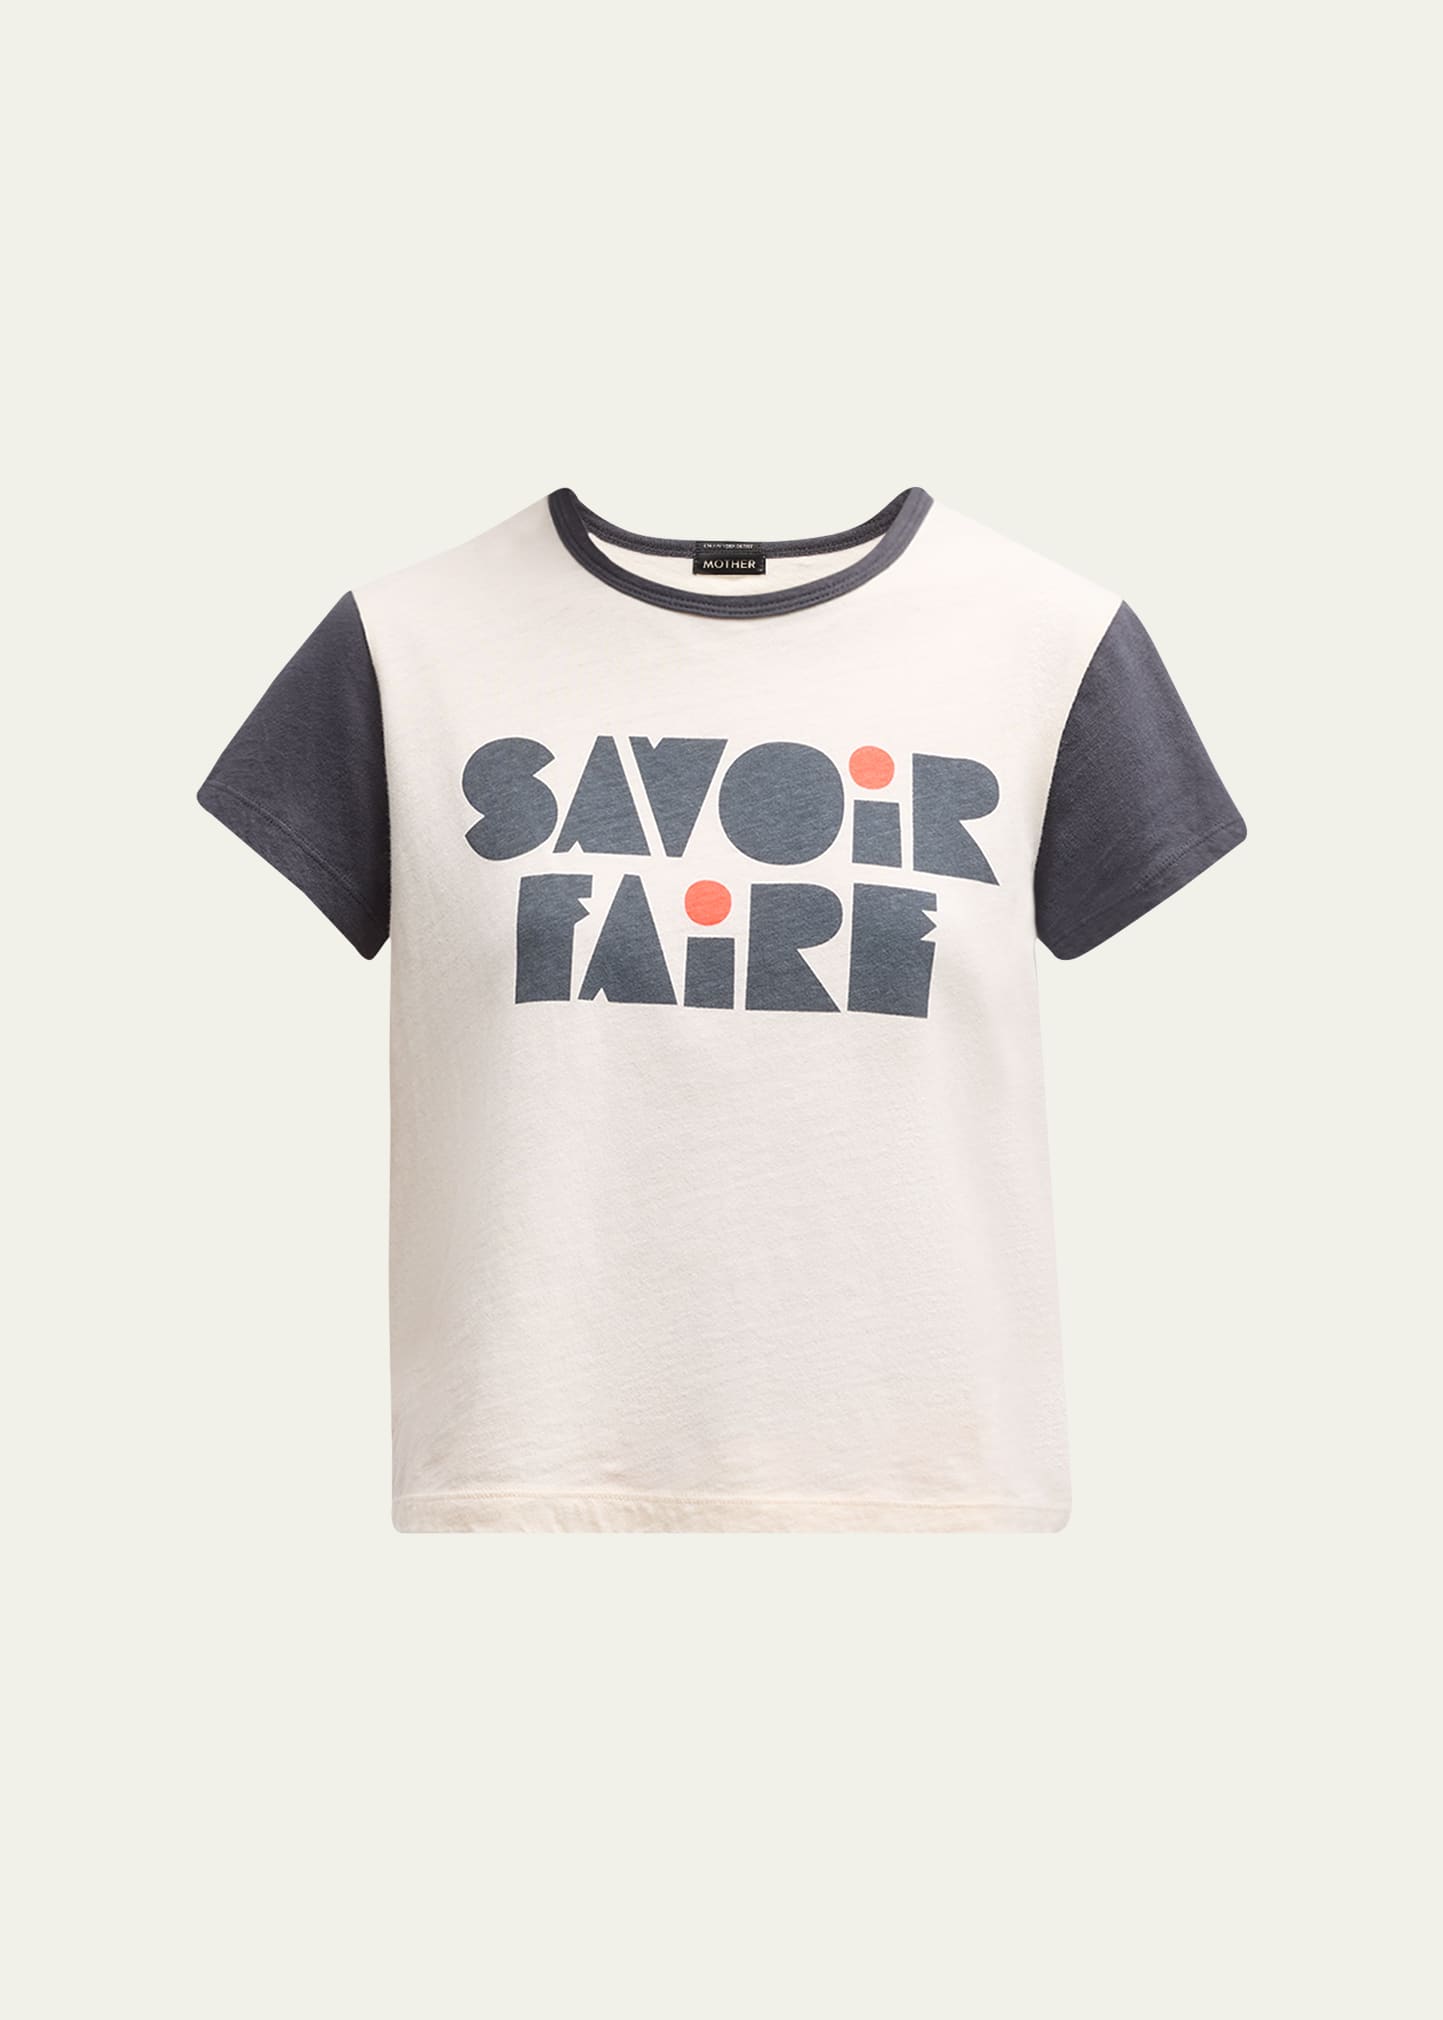 Shop Mother The Goodie Goodie Ringer Tee In Saviore Faire Svf